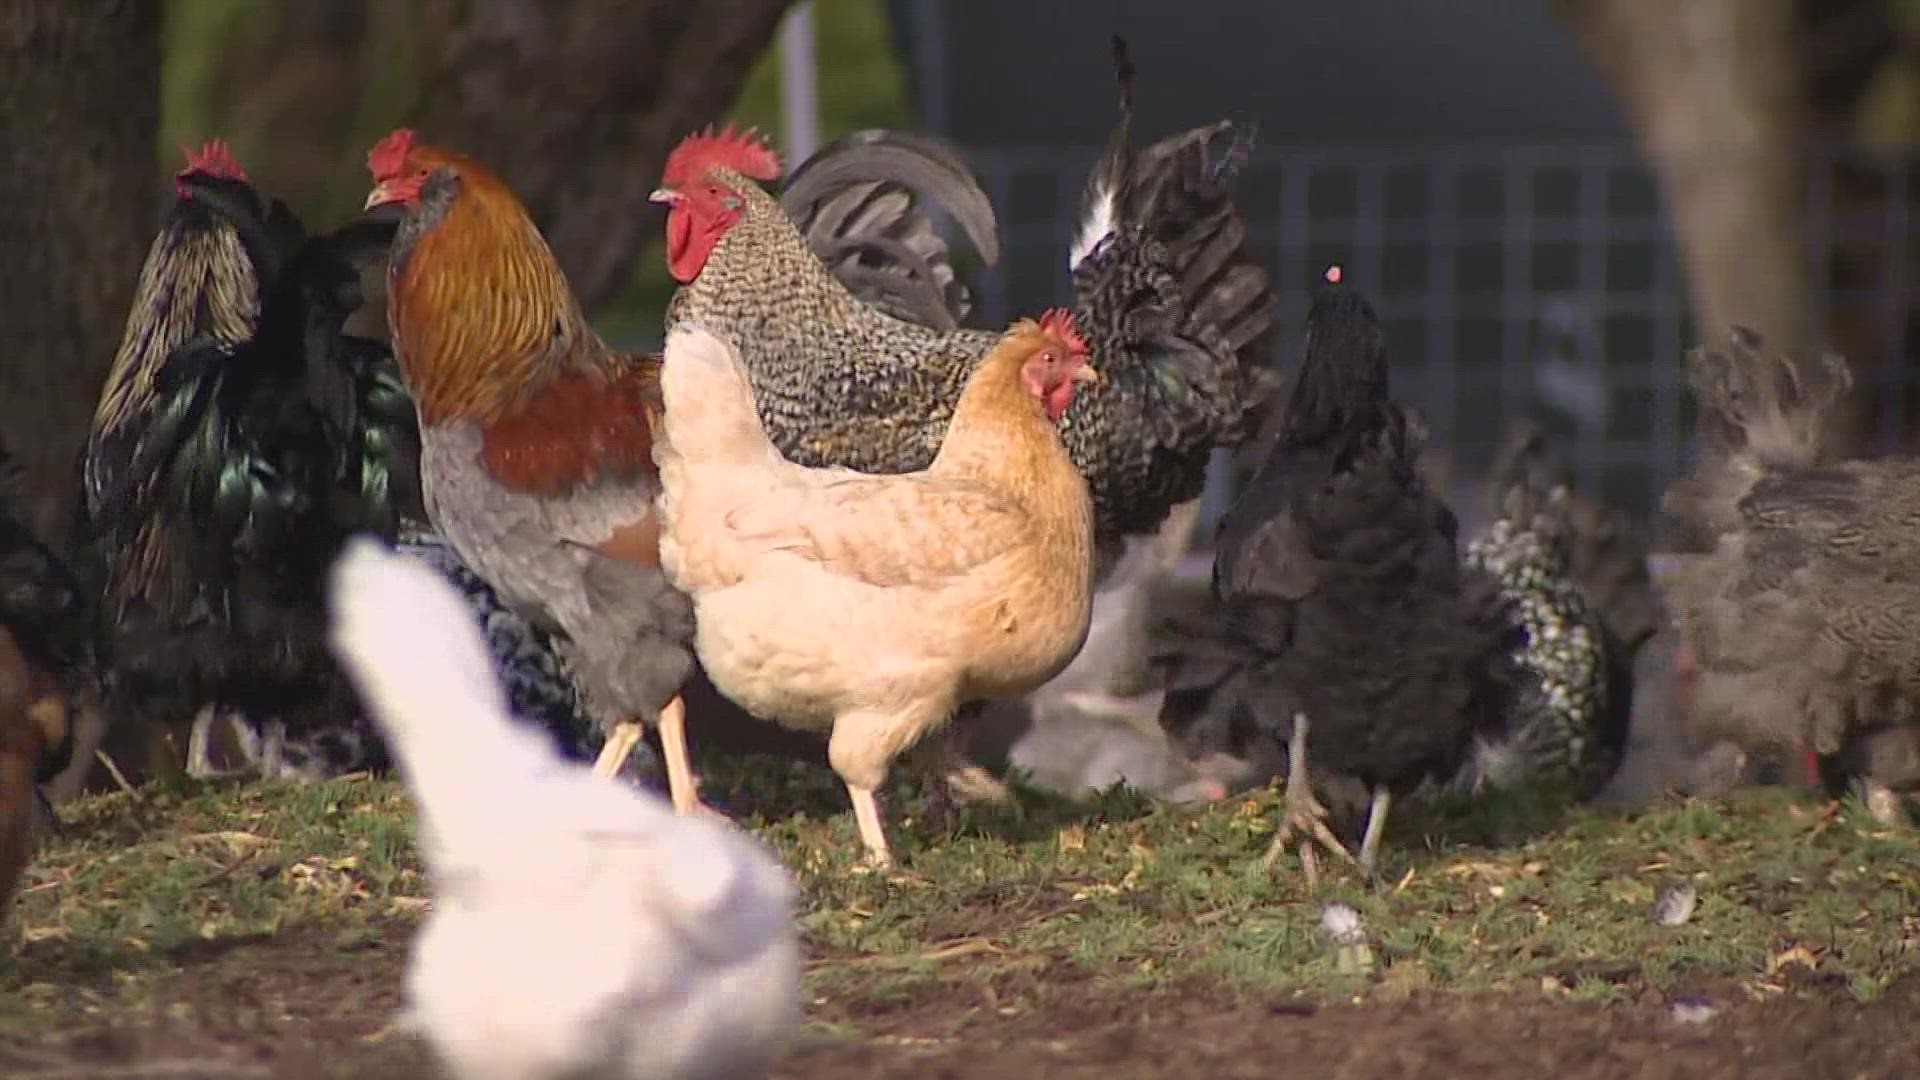 Avian Flu, supply shortages driving up the cost of eggs locally and